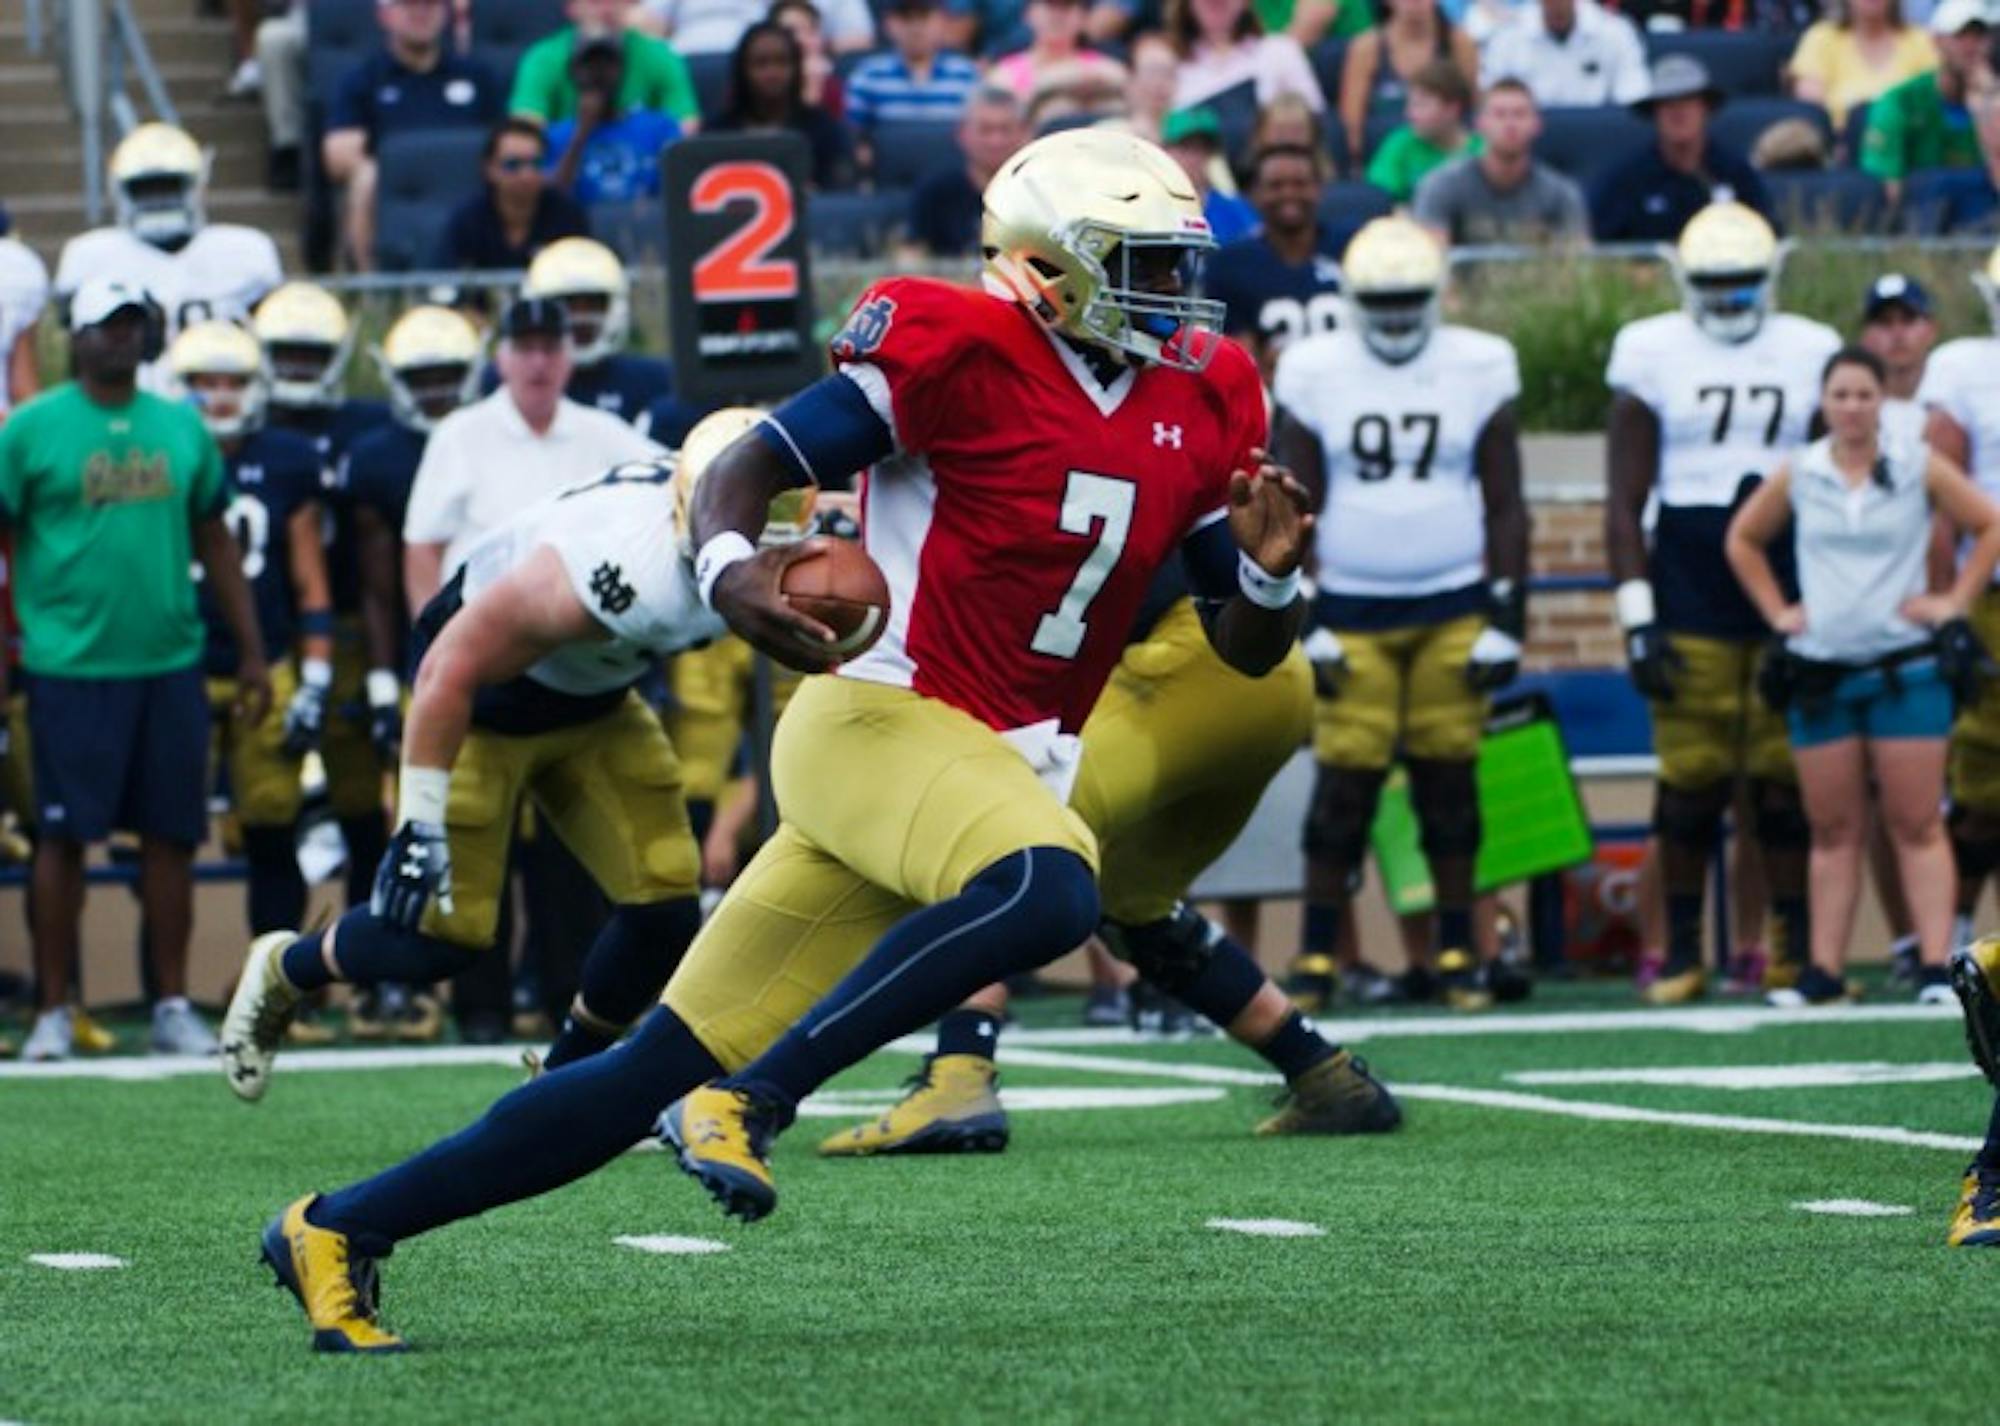 Irish junior quarterback Brandon Wimbush tucks the ball and scrambles from the pocket during Notre Dame’s New and Gold scrimmage Sunday at Notre Dame Stadium.